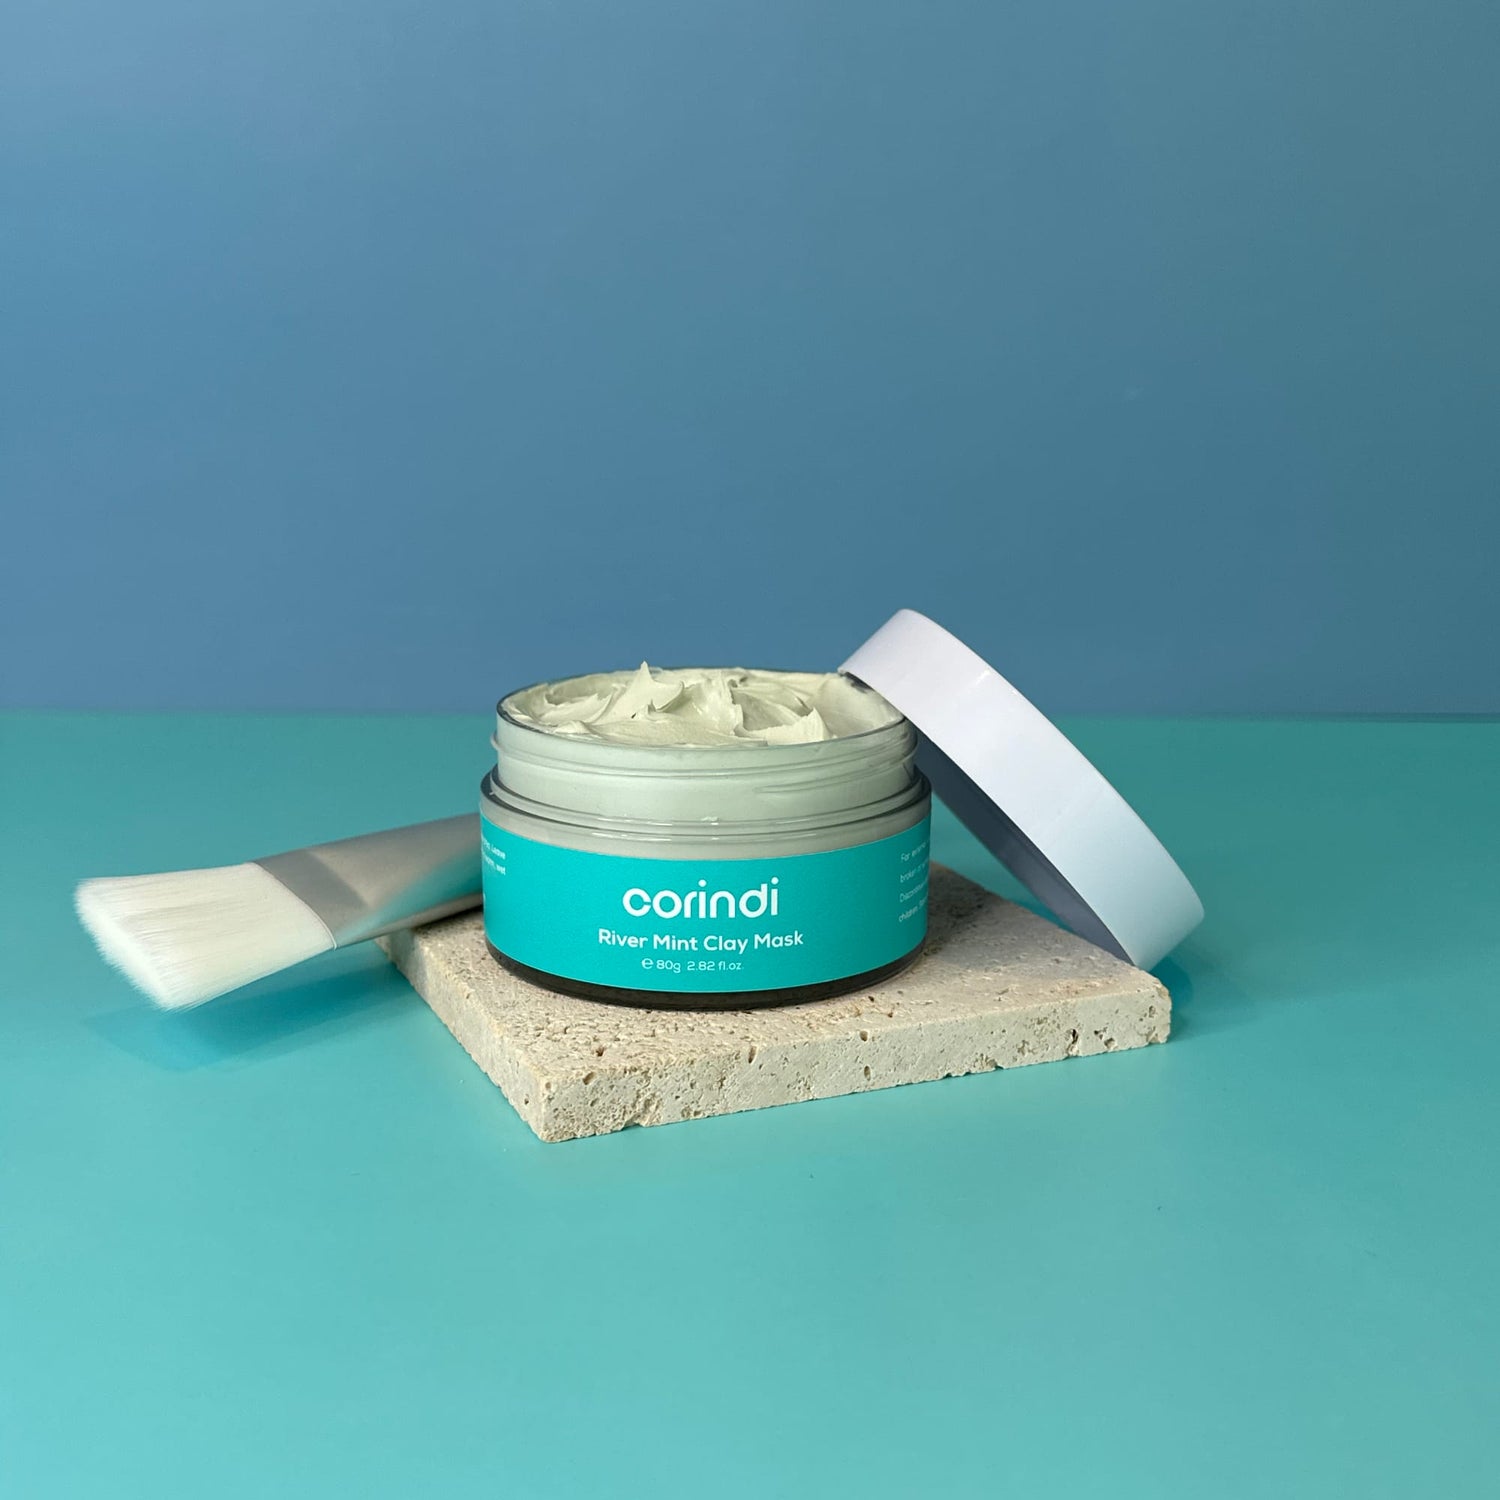 River Mint Clay Mask